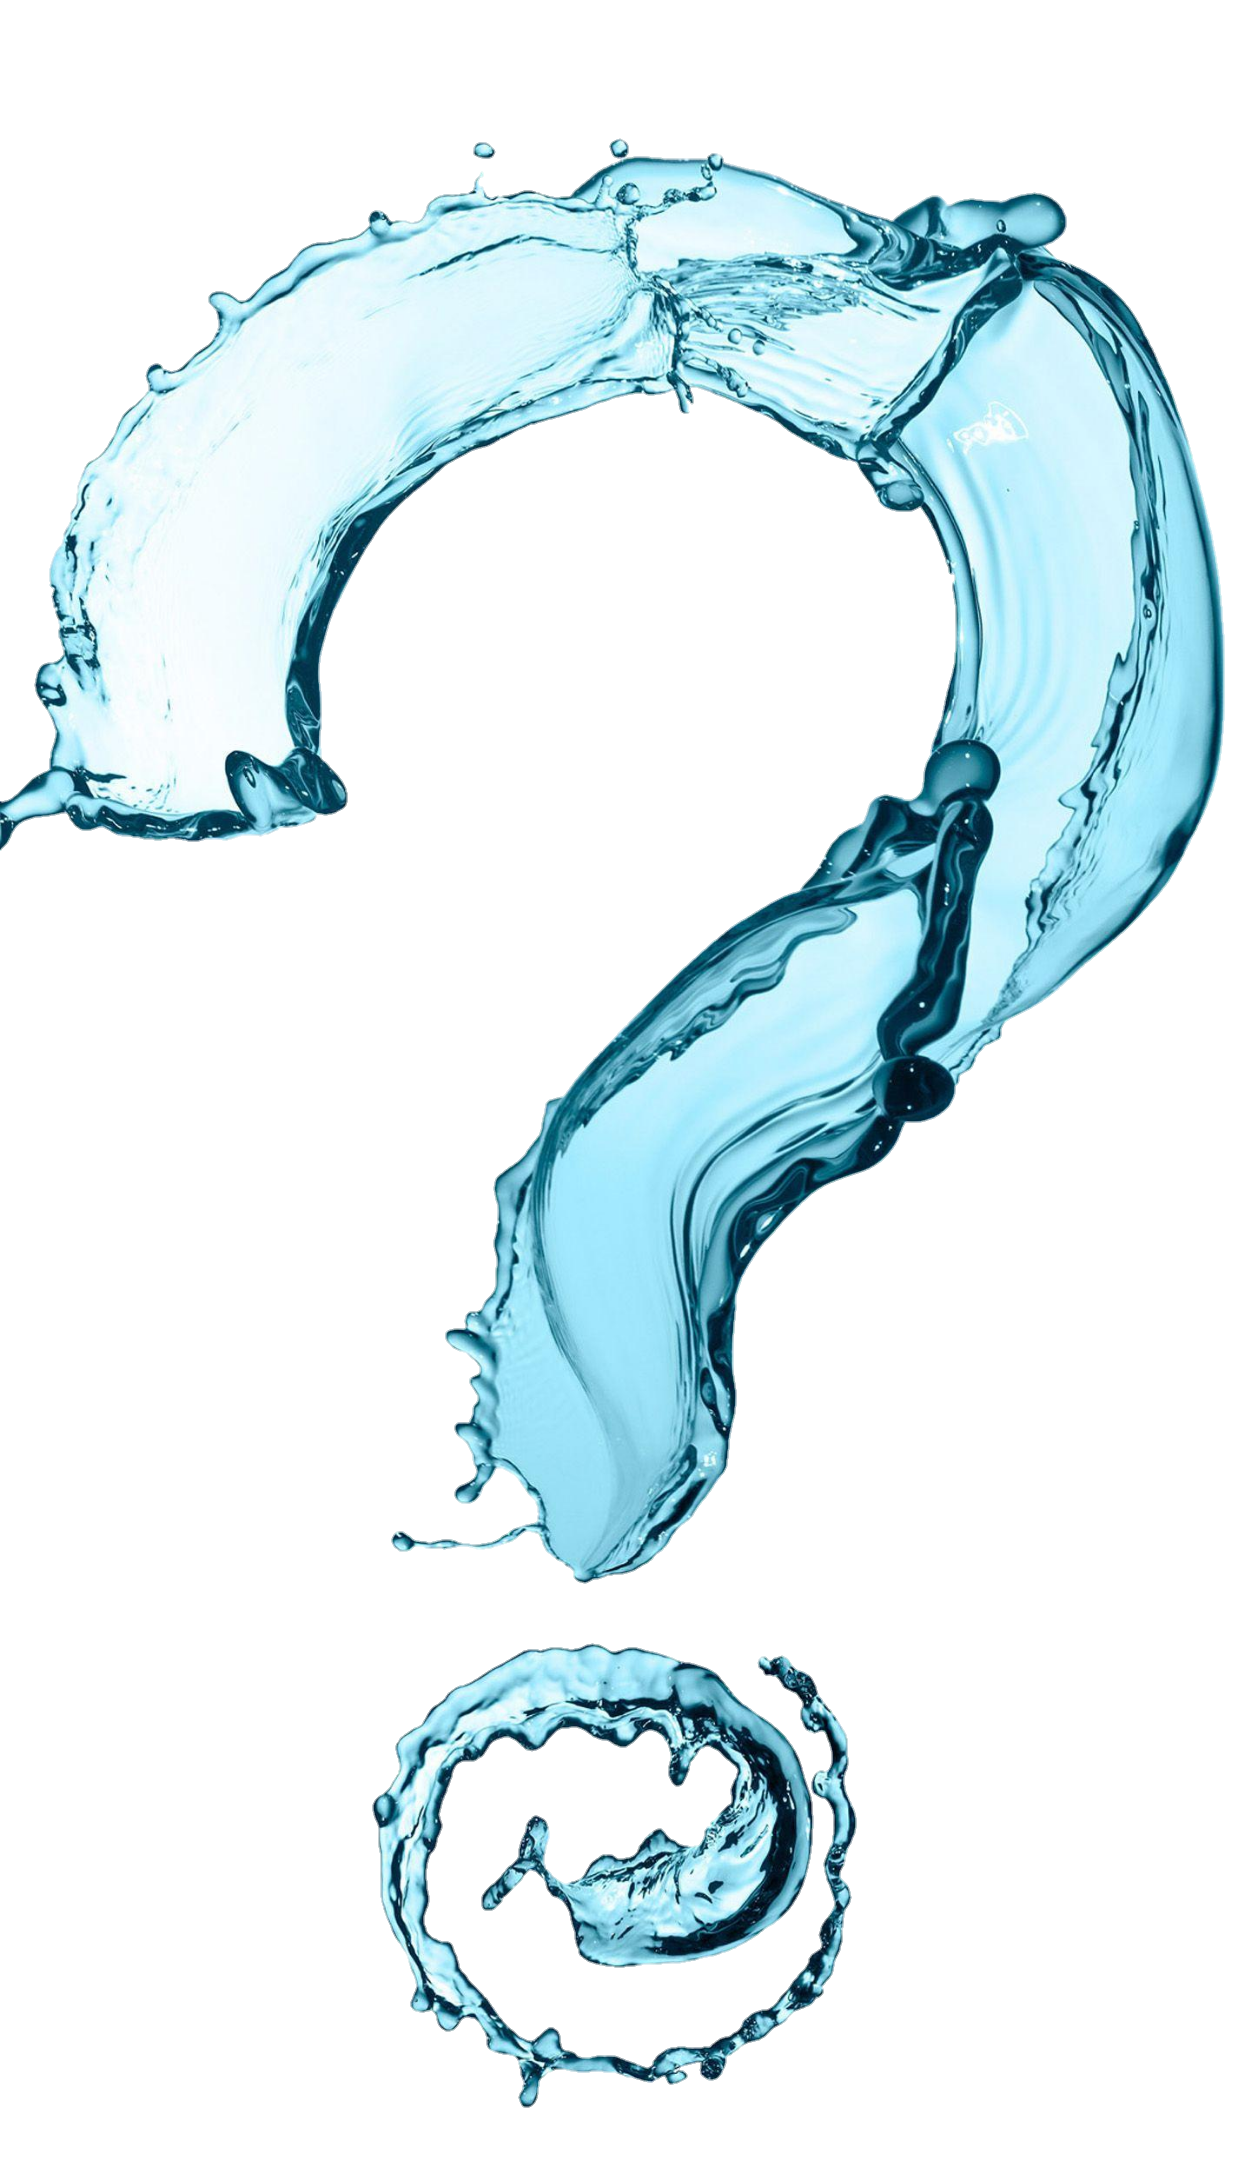 question-mark-png-from-pngfre-5-1